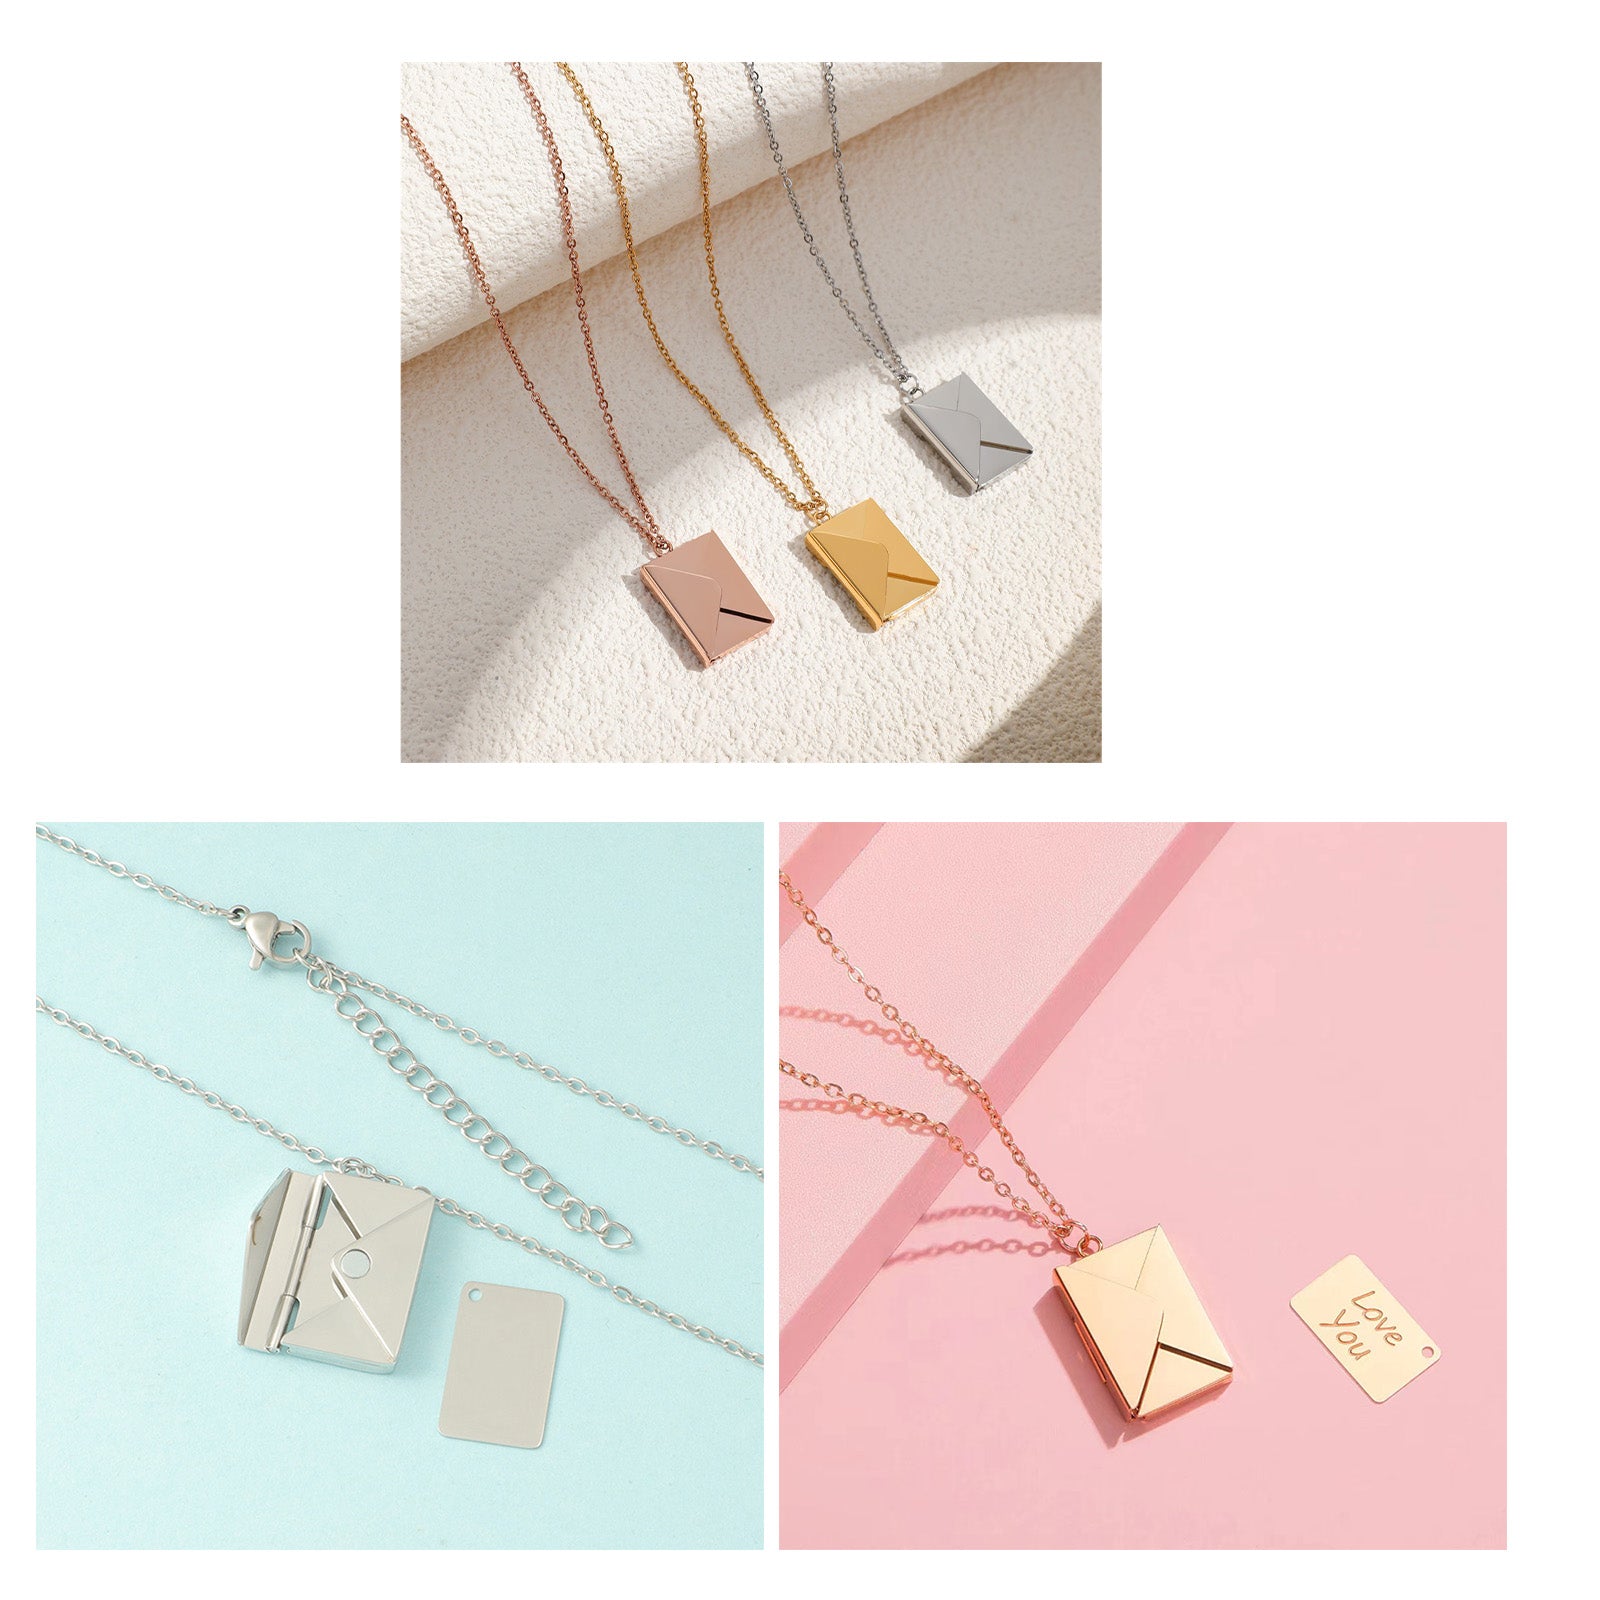 Stainless steel Personalized Love Letter Necklaces